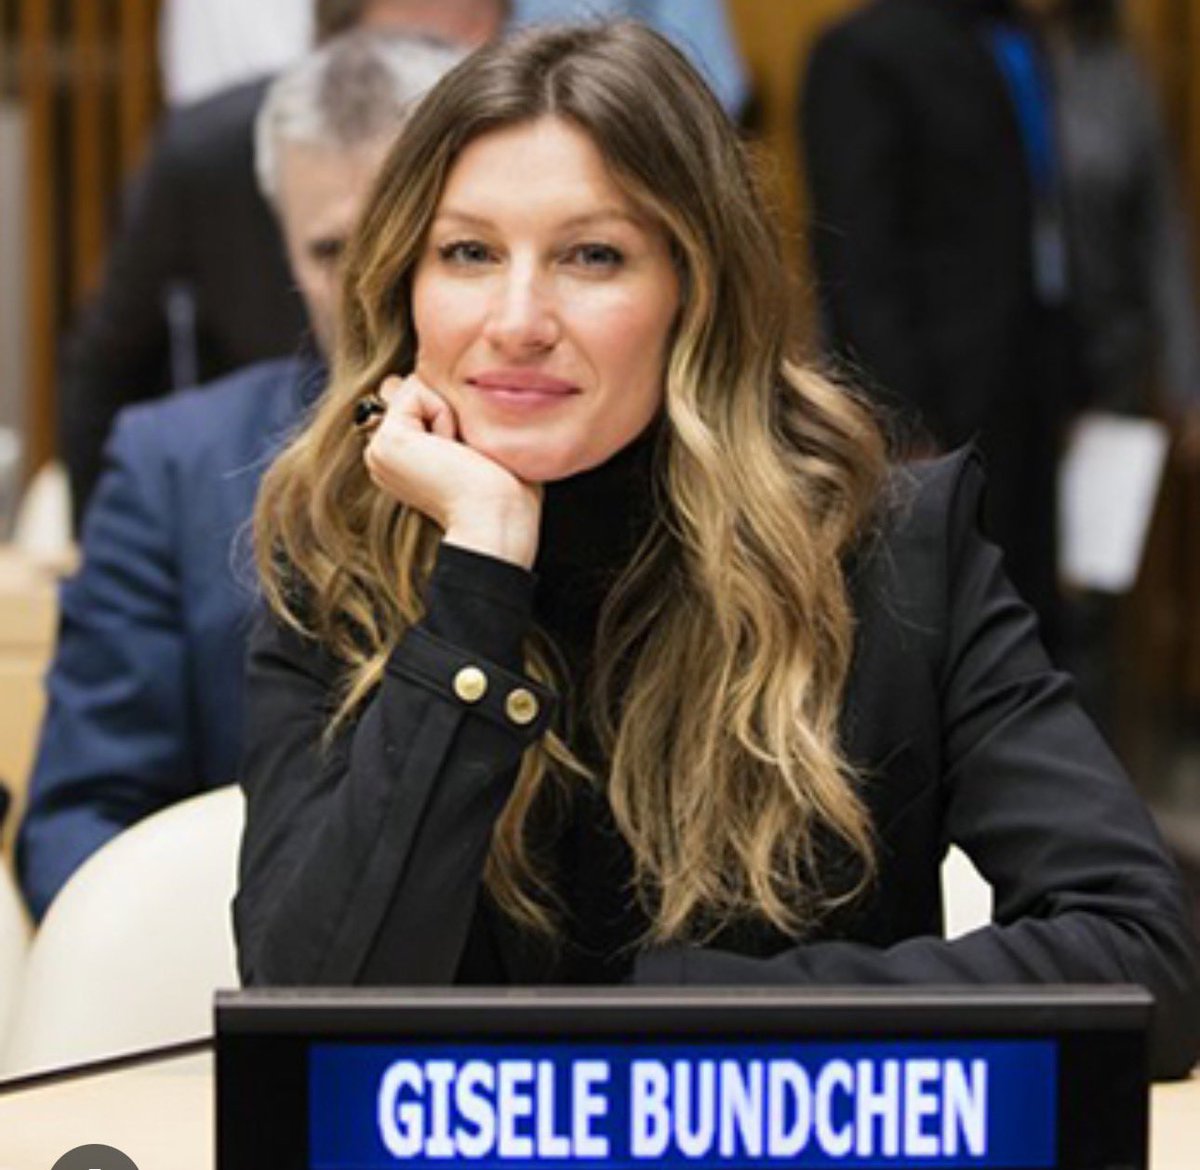 One thing leads to the other. Deforestation leads to climate change, which leads to ecosystem losses, which negatively impacts our livelihoods – it’s a vicious cycle. #Act #ClimateAction #ACCAI Gisele Bundchen, Supermodel & UN Goodwill Ambassador